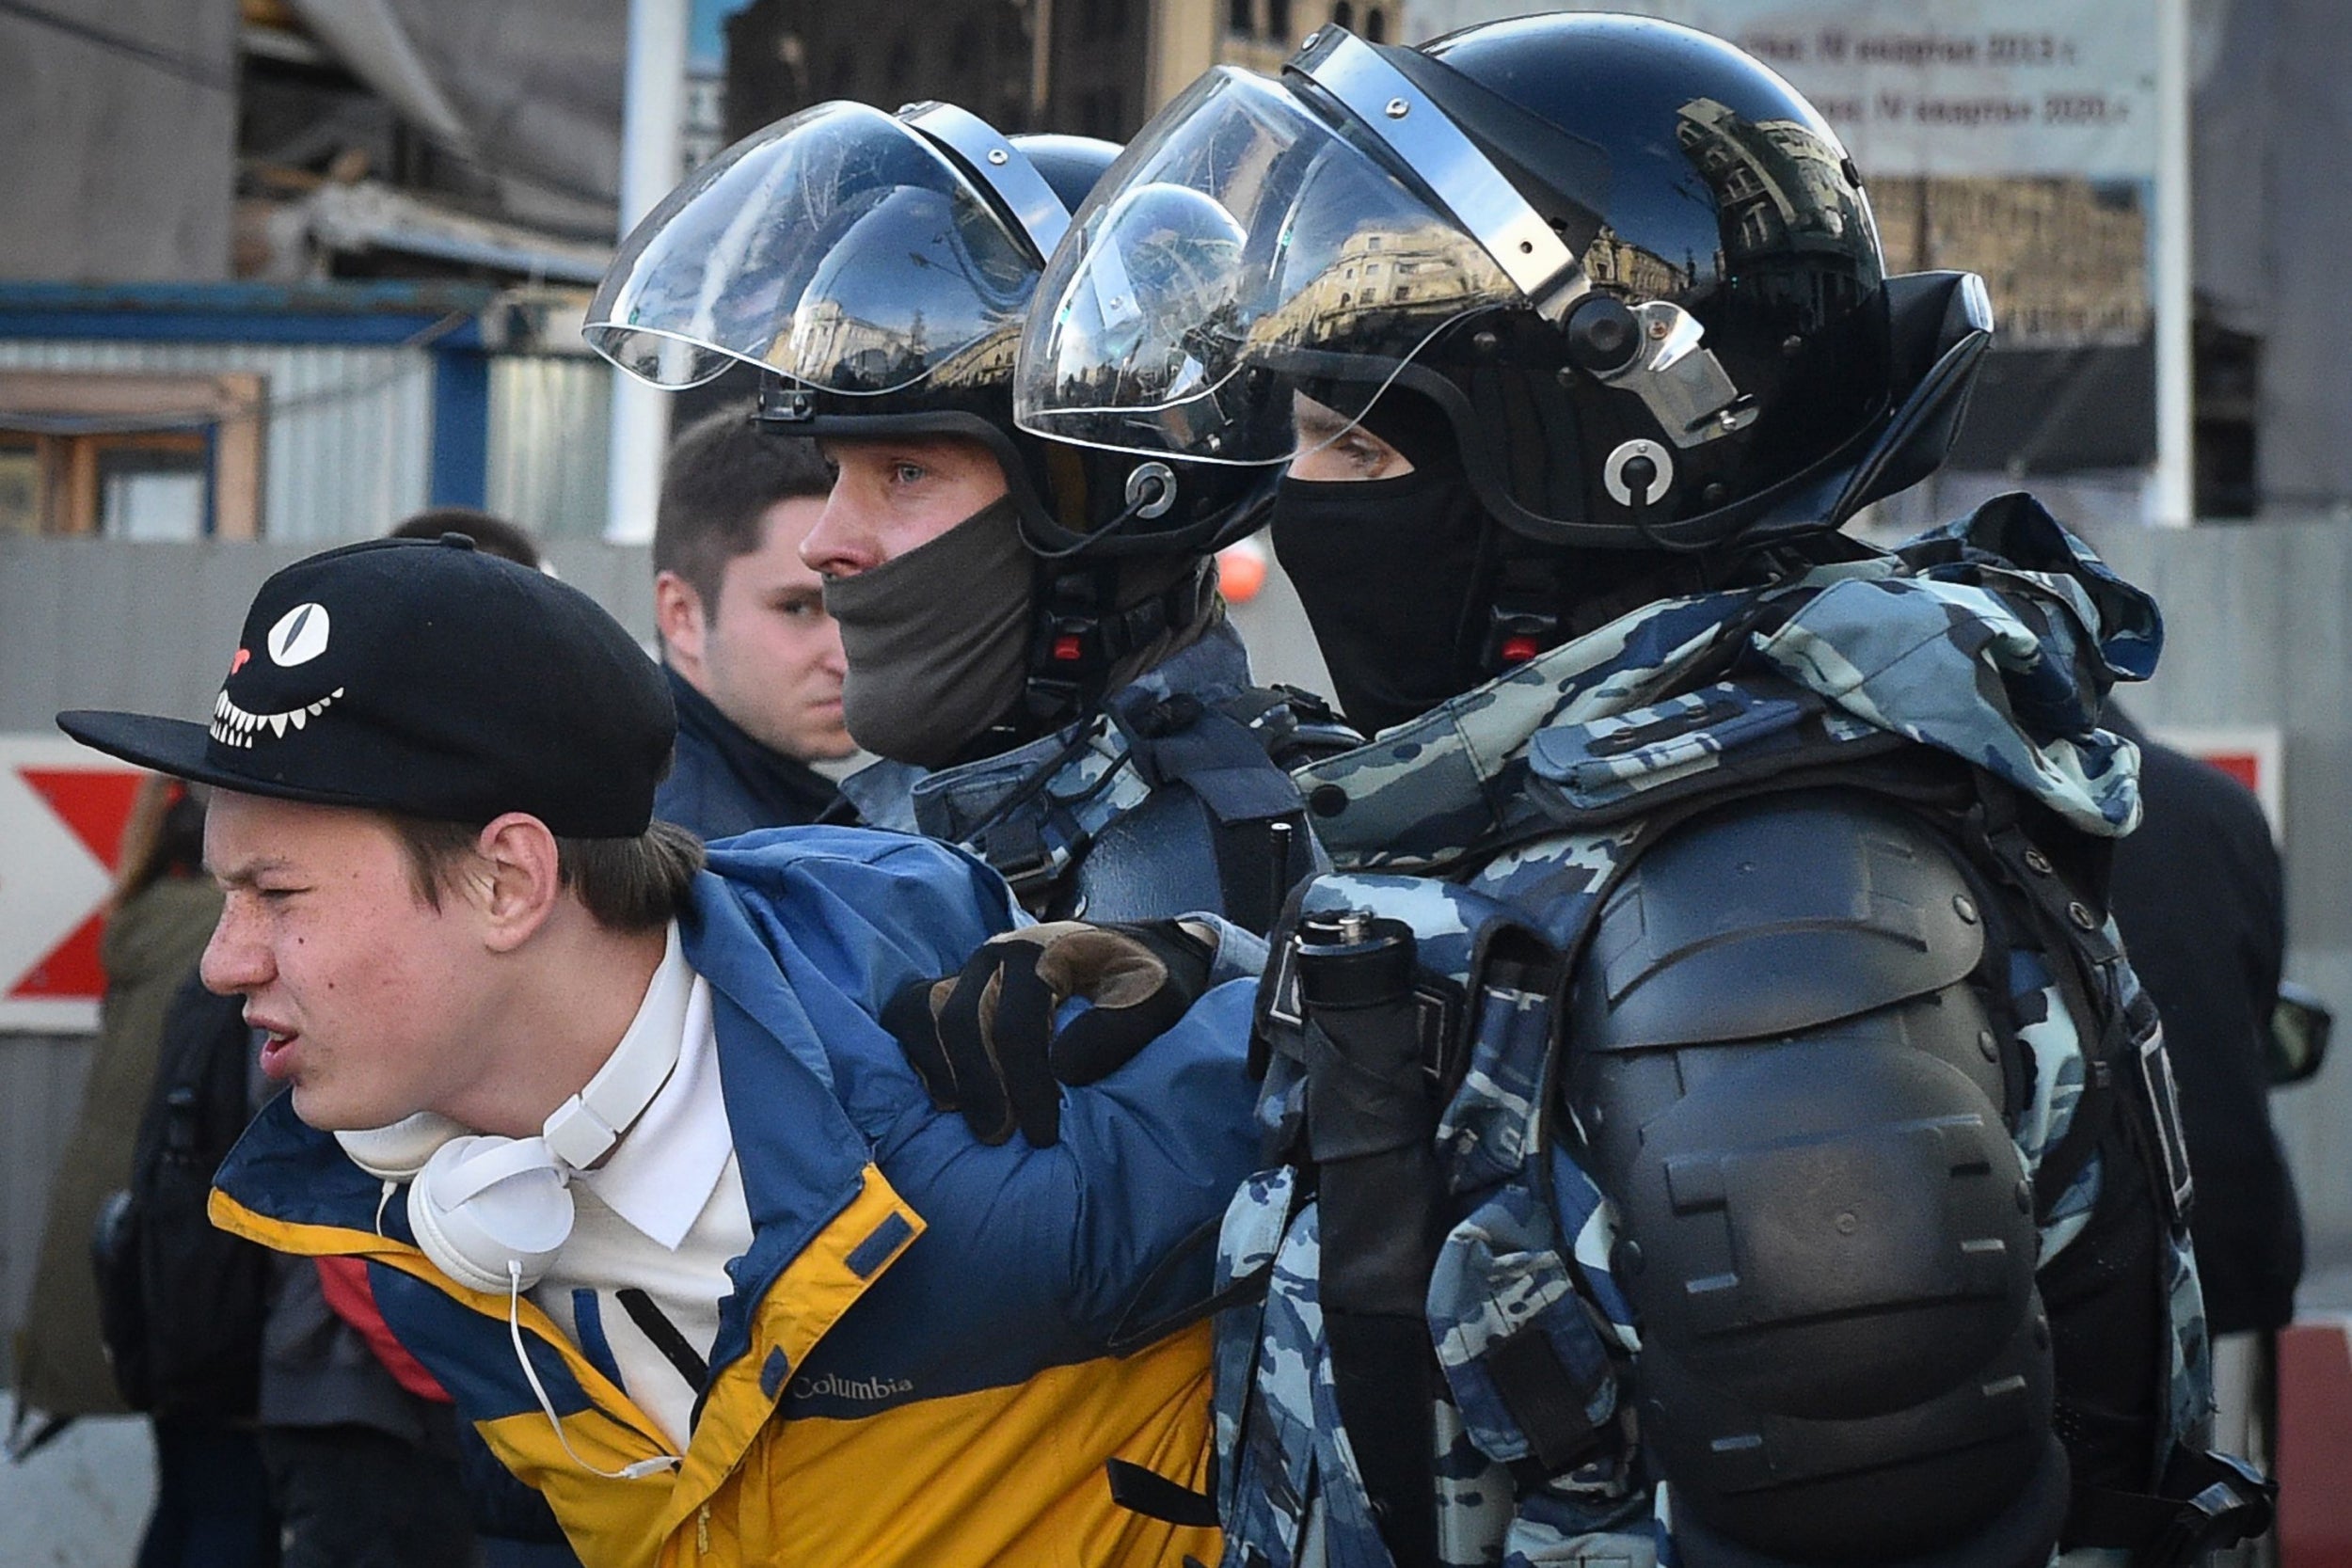 Police officers detain a man after a rally urging fair elections in Moscow in August